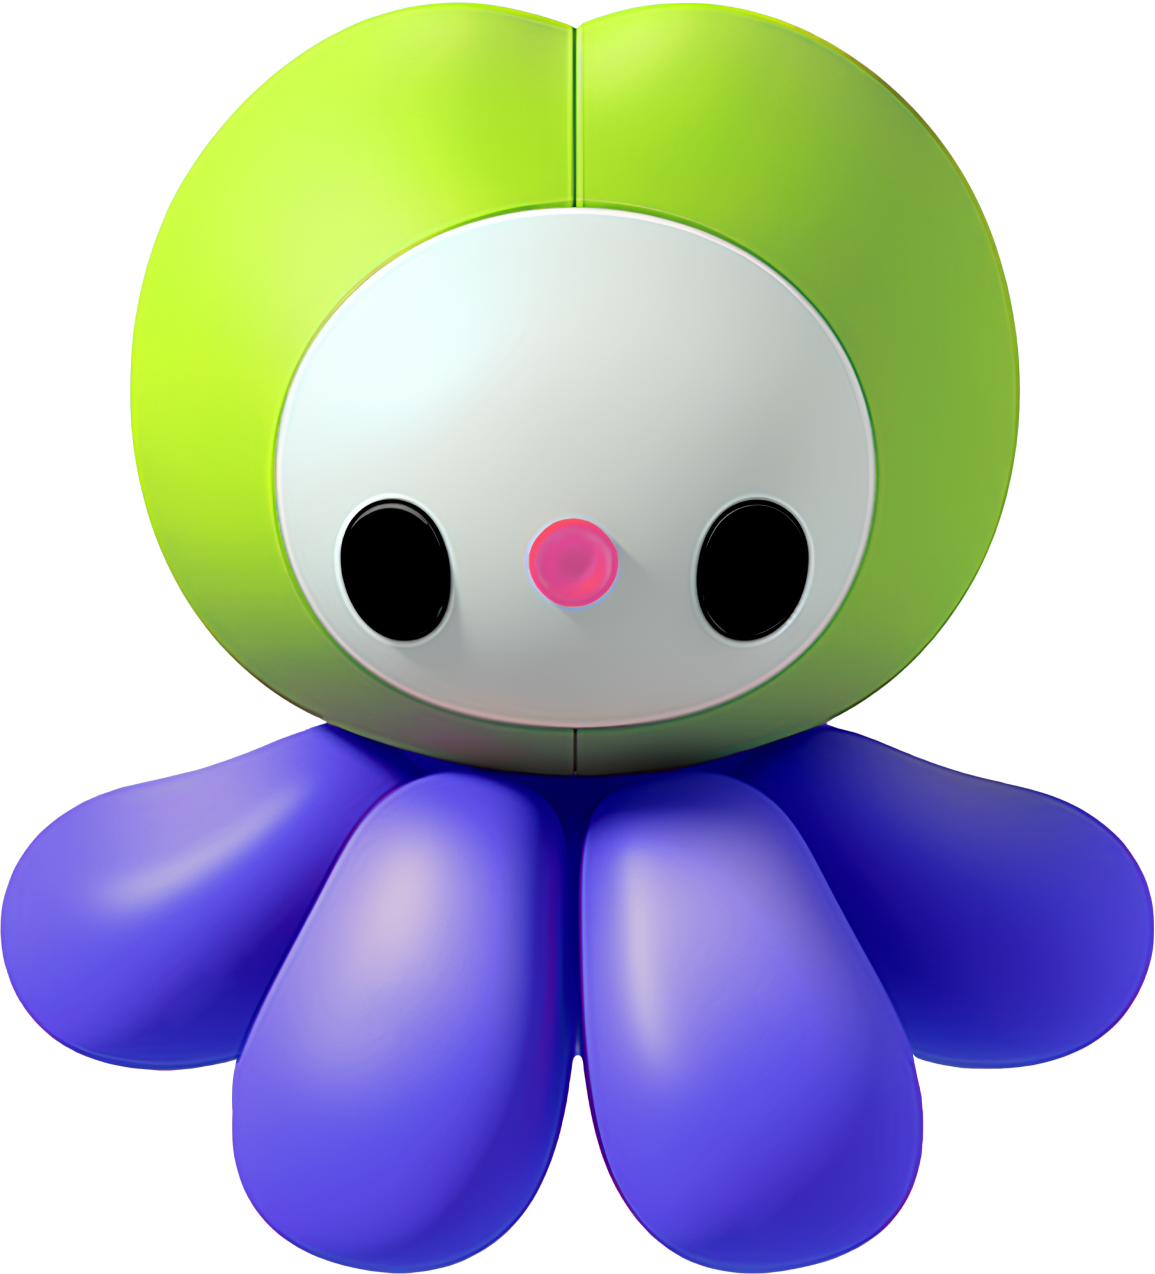 a cartoon toy with a round face